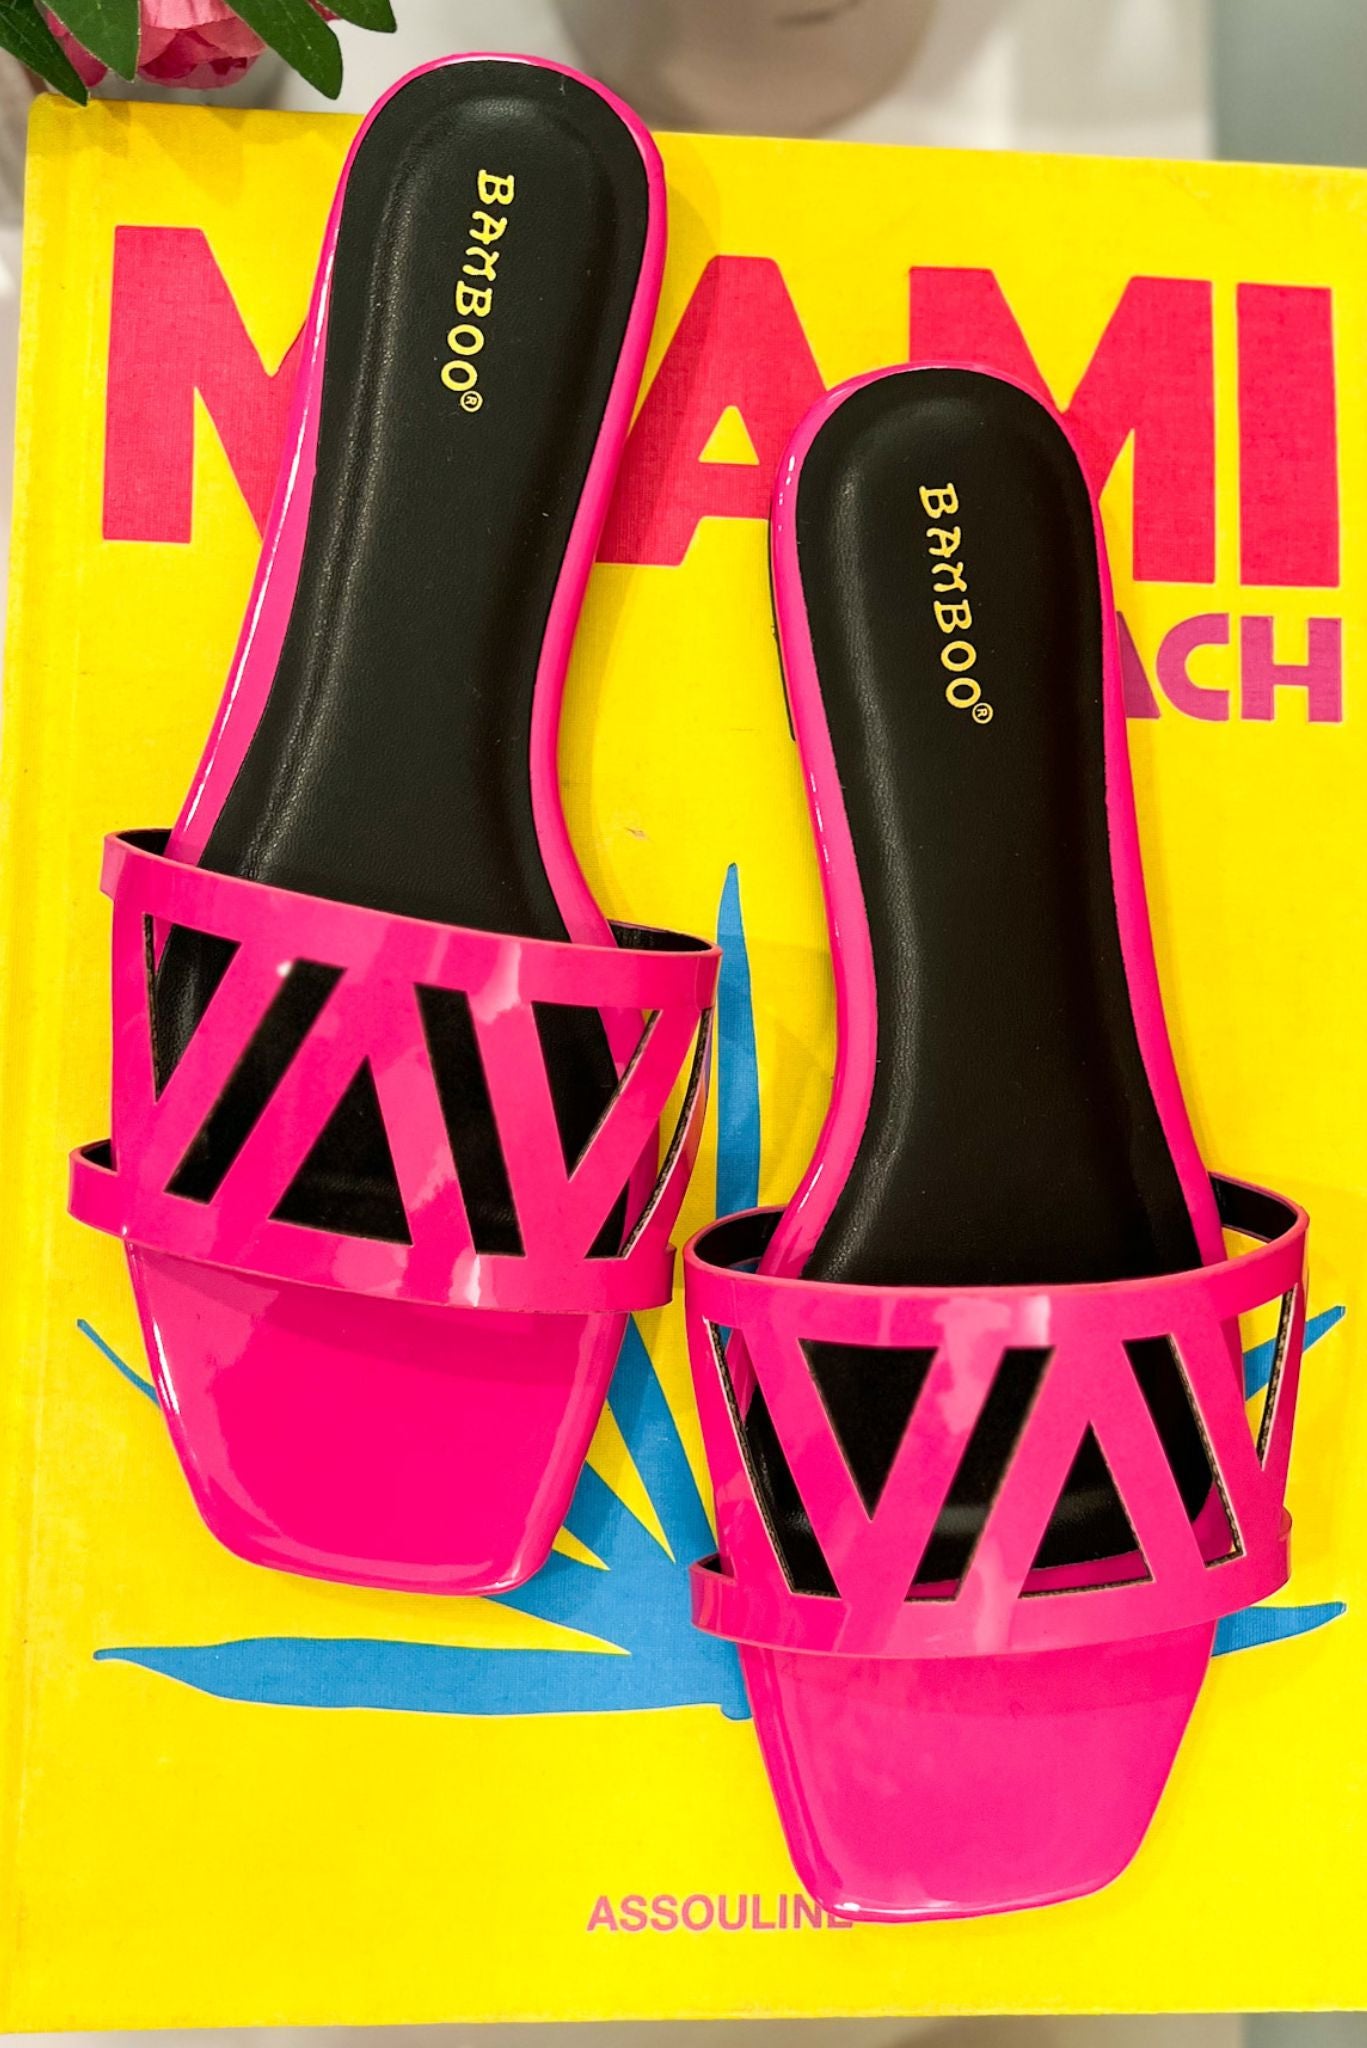 hot pink Patent Geometric Design Sandals, spring fashion, metallic, elevated look, mom style, must have, shop style your senses by mallory fitzsimmons